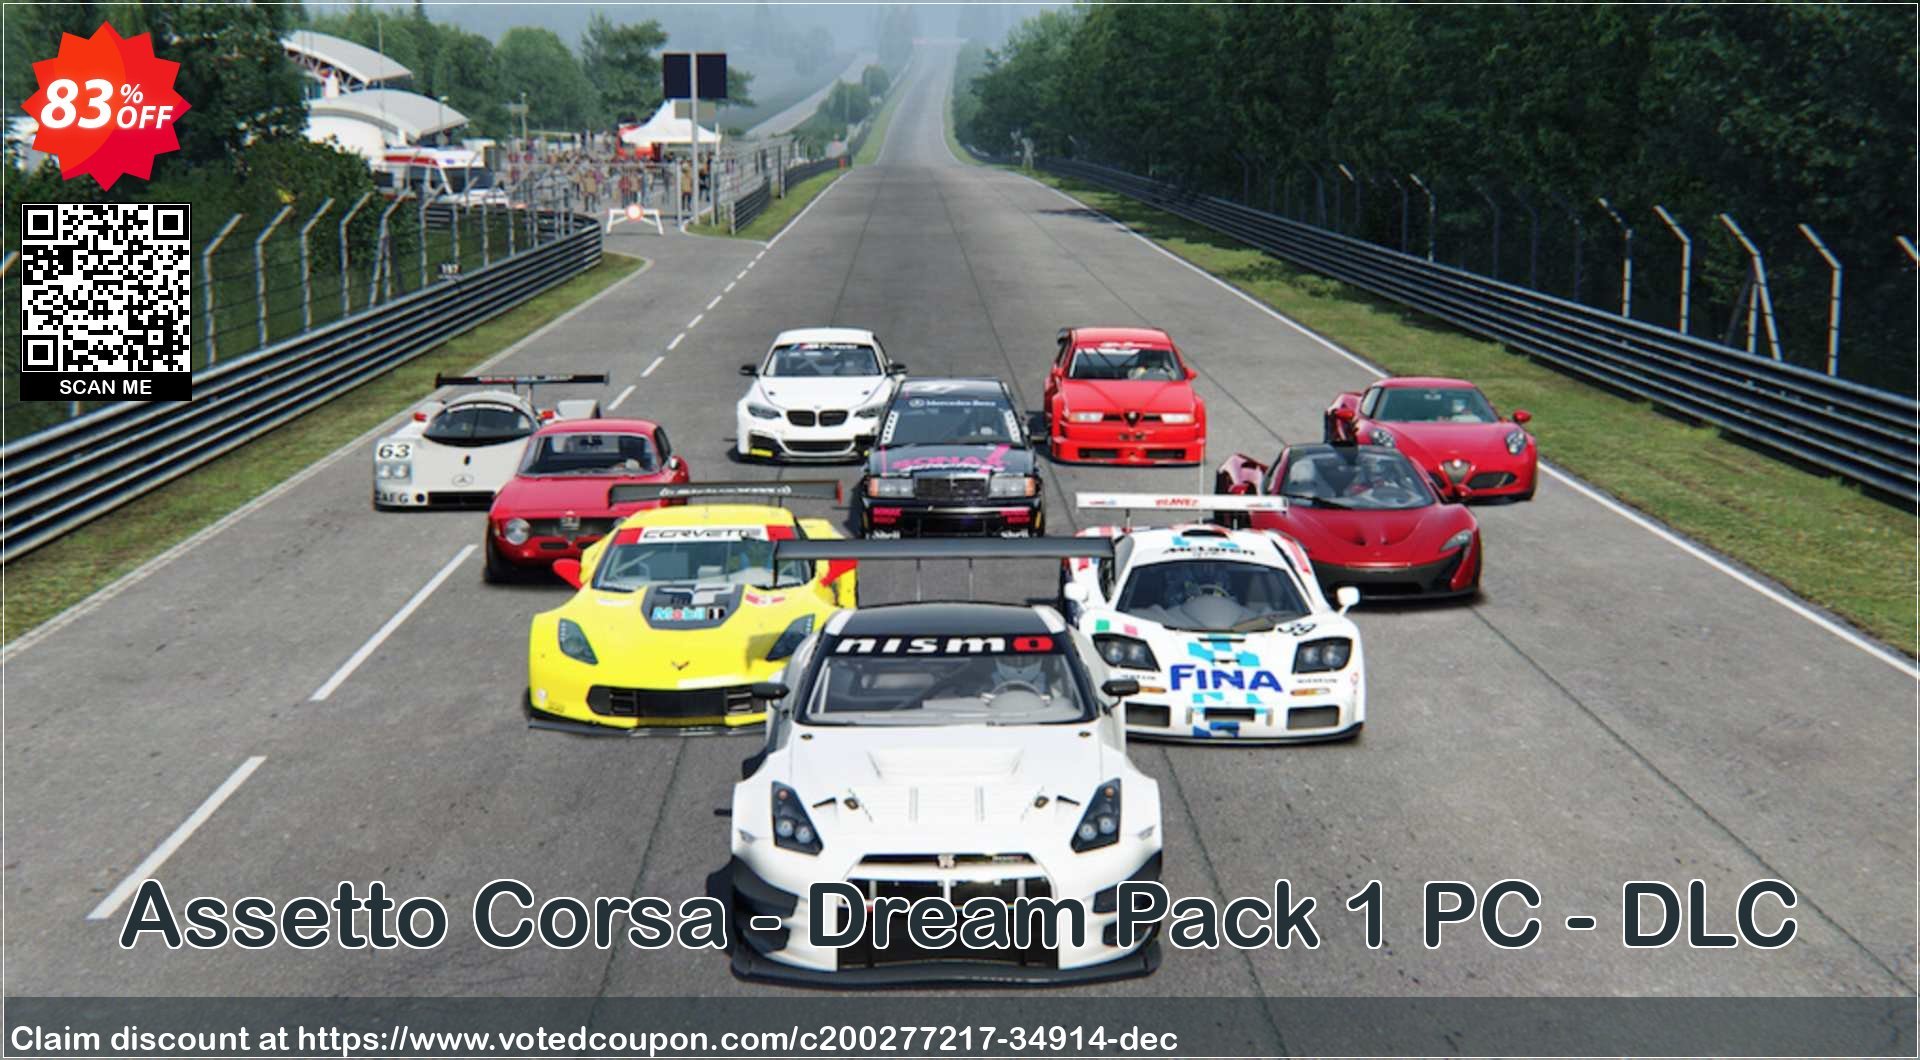 Assetto Corsa - Dream Pack 1 PC - DLC Coupon Code May 2024, 83% OFF - VotedCoupon